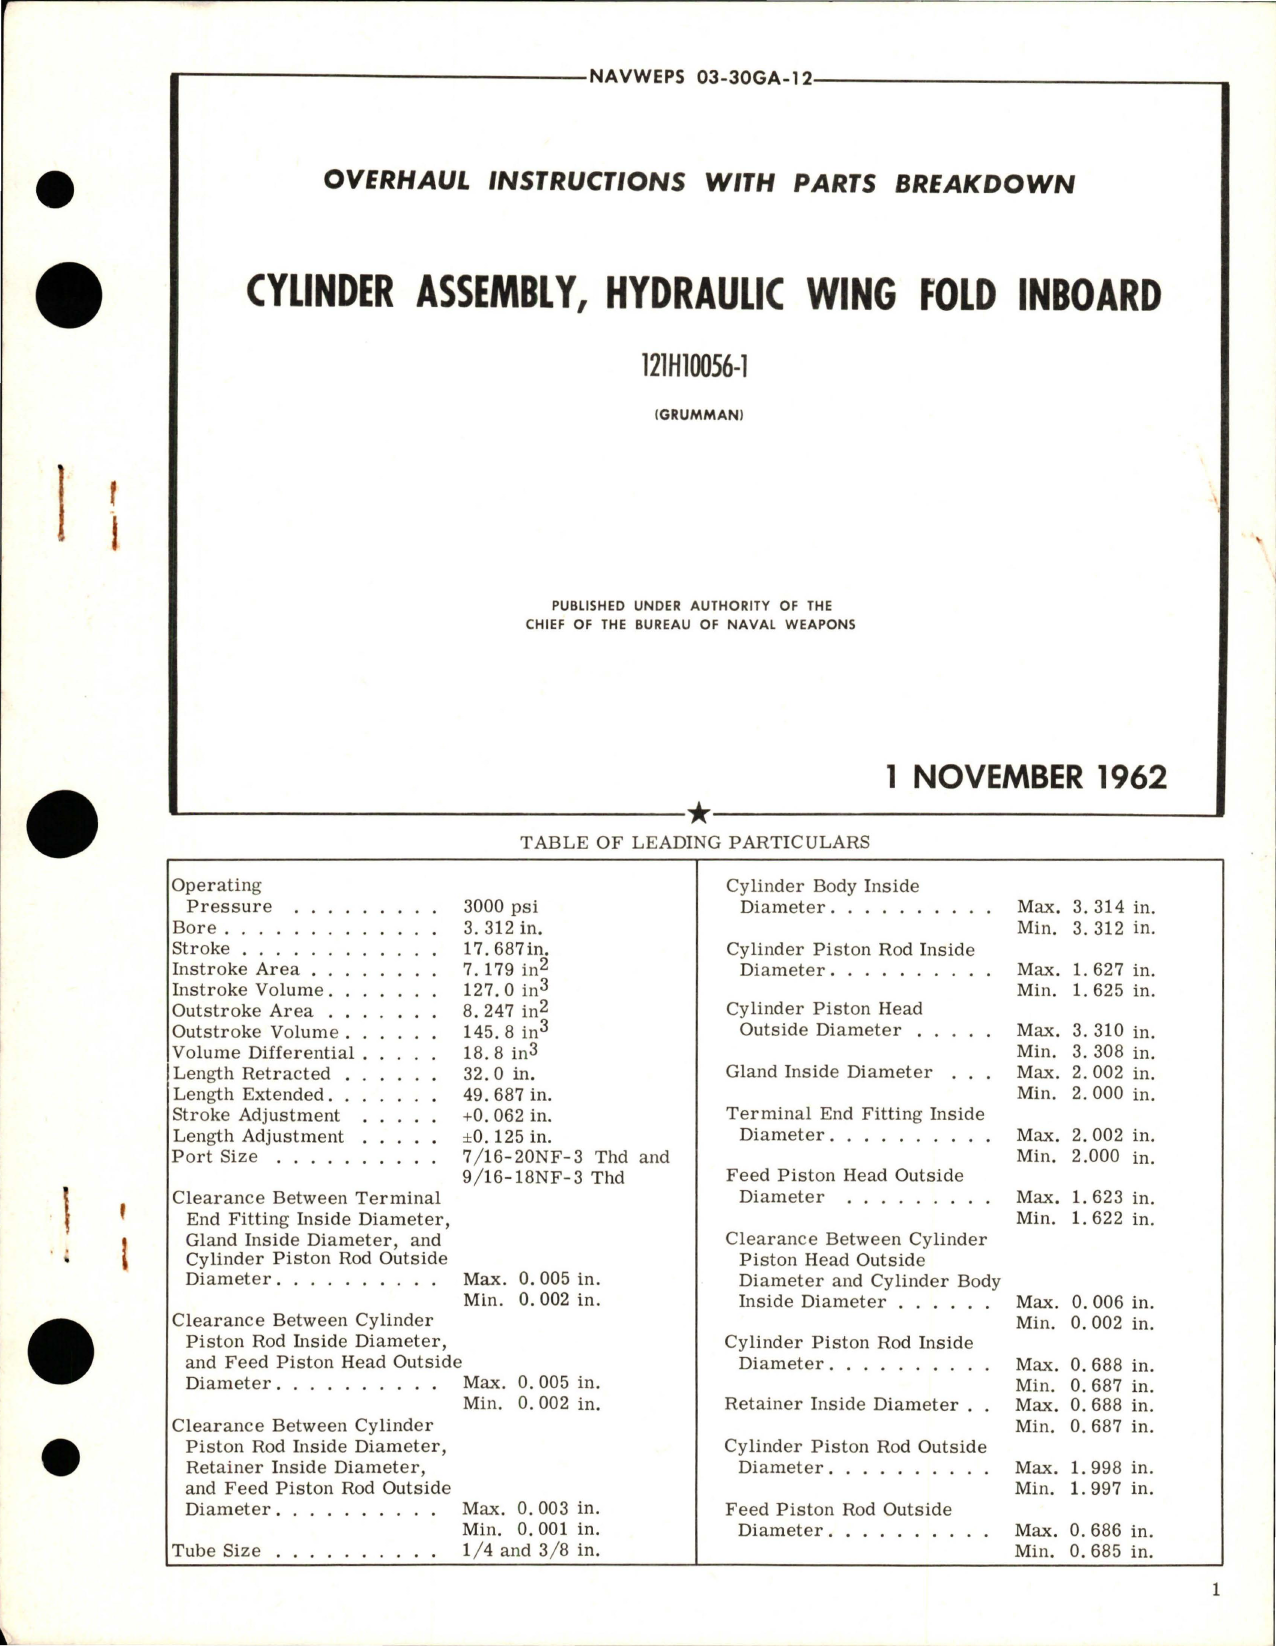 Sample page 1 from AirCorps Library document: Overhaul Instructions with Parts Breakdown for Hydraulic Wing Fold Inboard Cylinder Assembly - 121H10056-1 